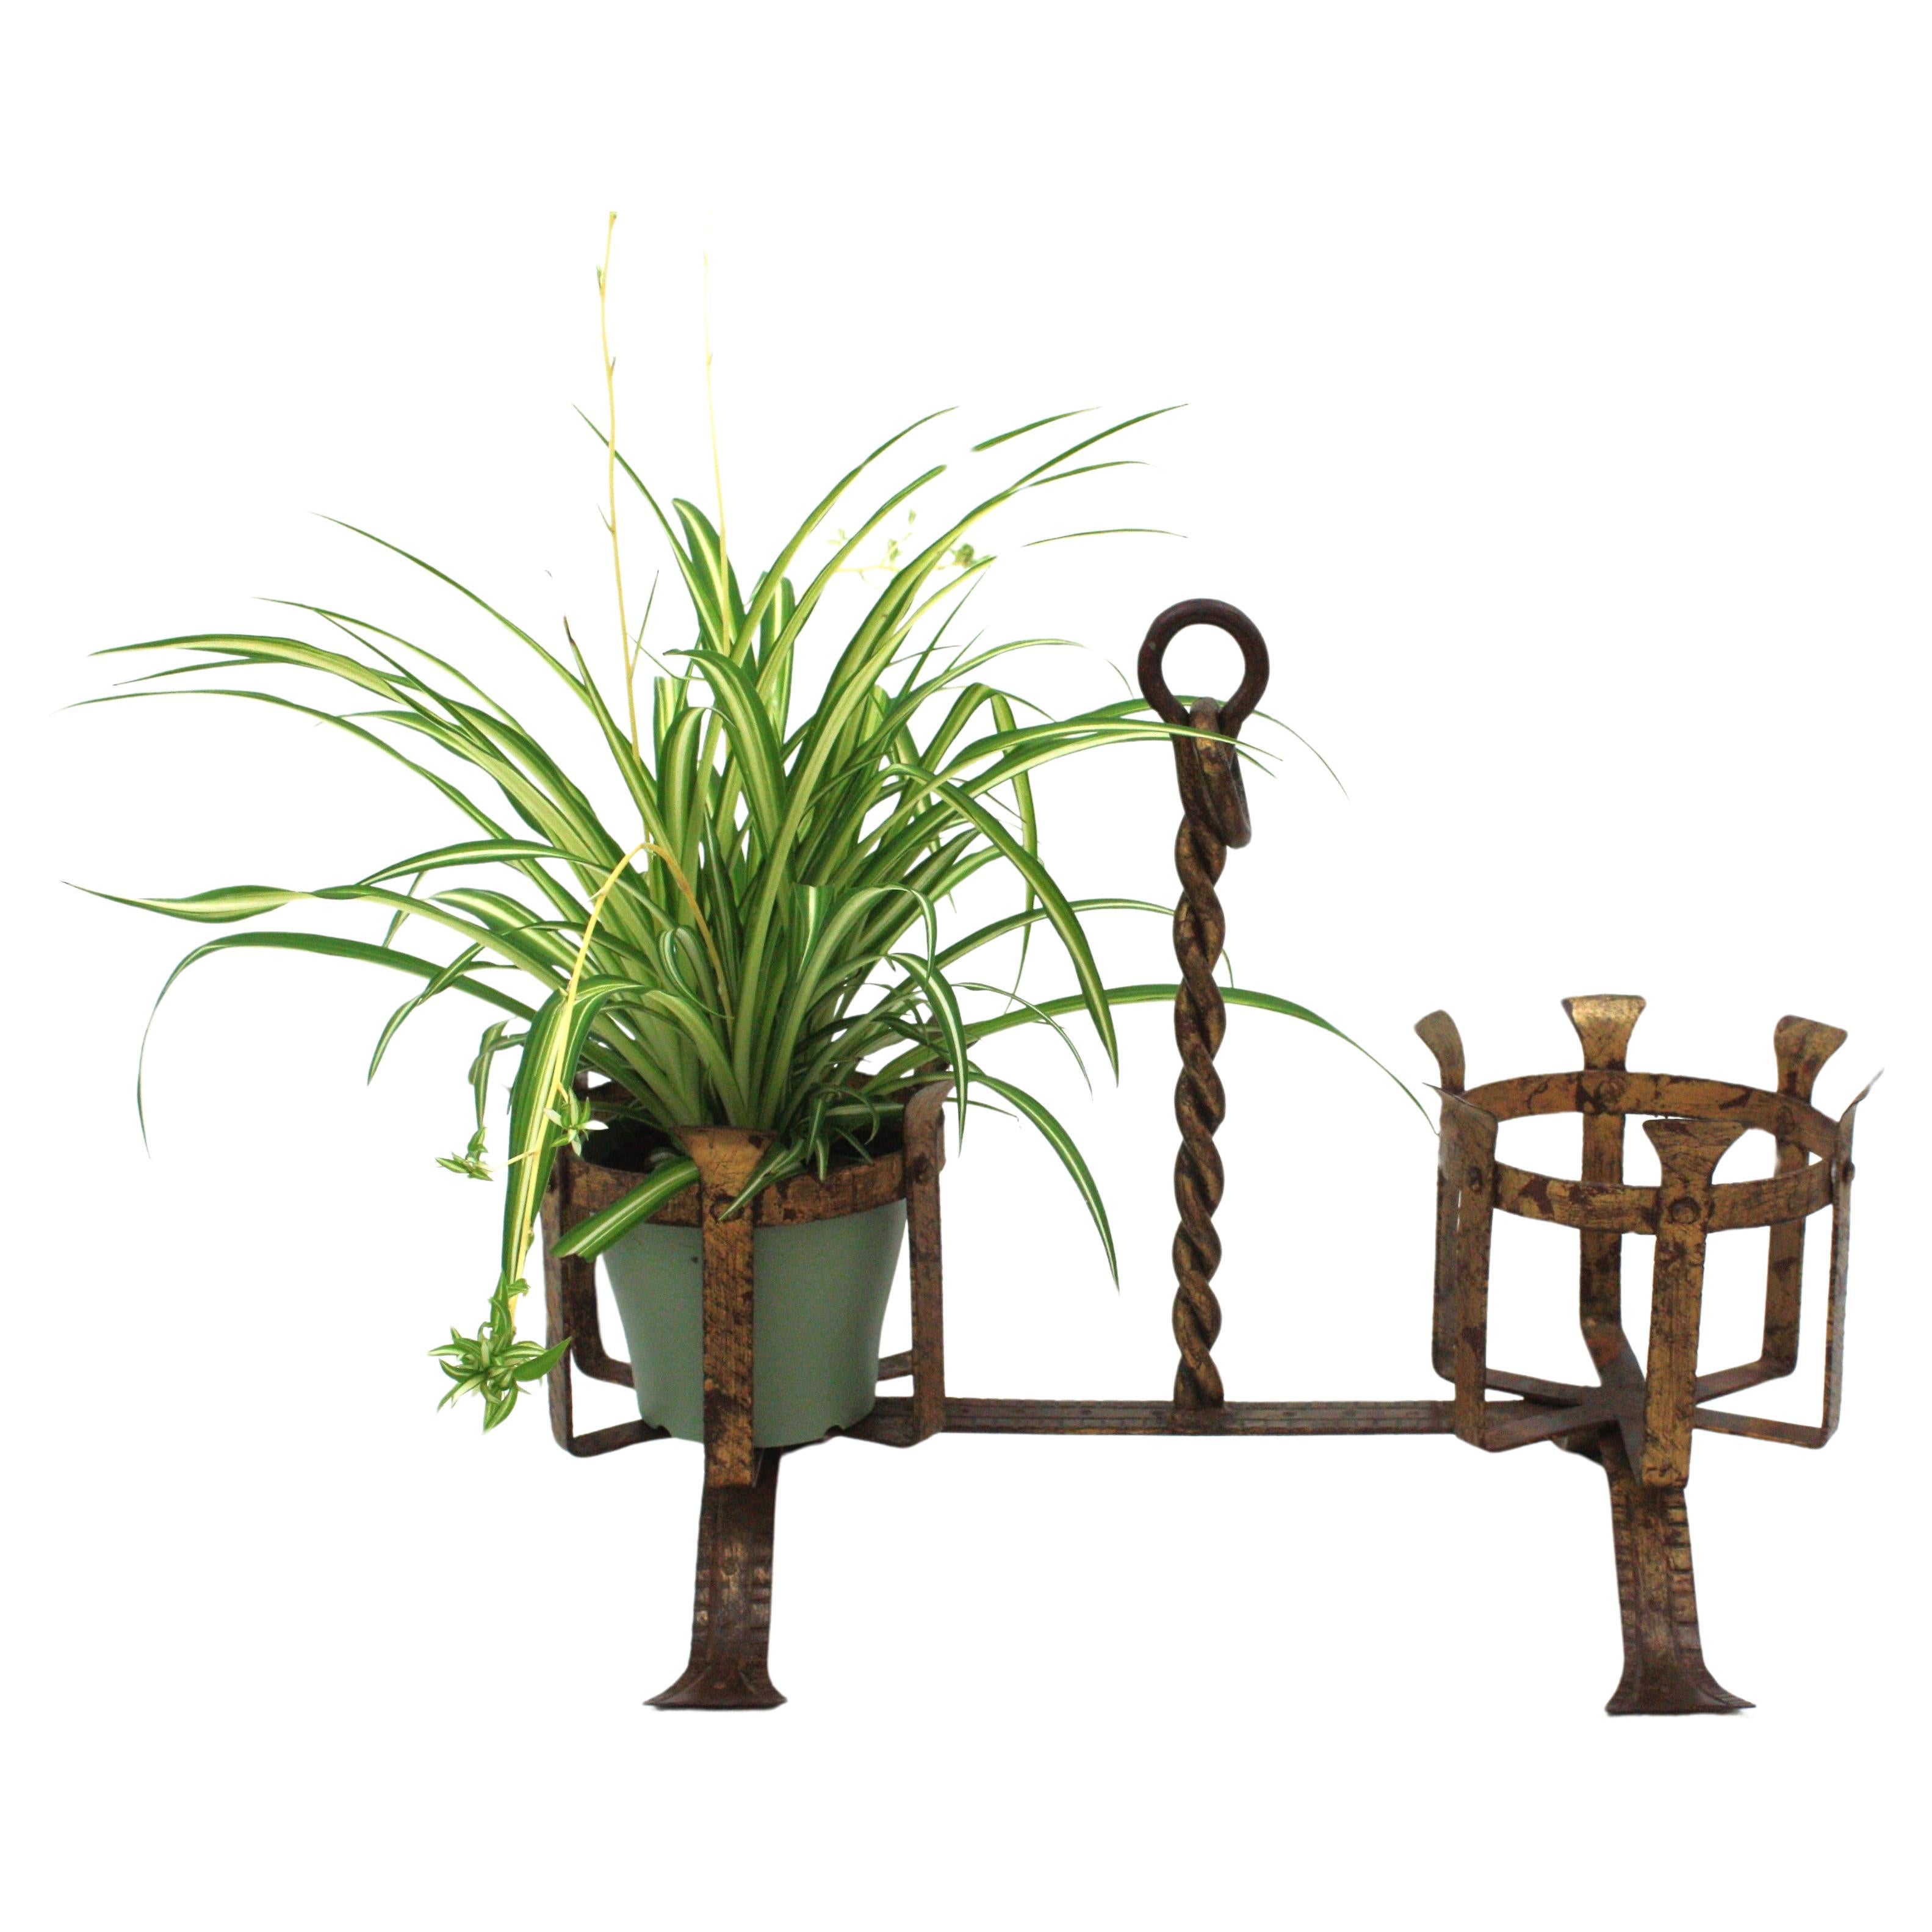 Hand Forged Double Floor Planter, Gold leaf, gilt iron, Spain, 1940s.
Rare find.
One of a kind double plant iron stand entirely made by hand. This planter features two basket planters joined between them with an iron stretcher. They stand on a four